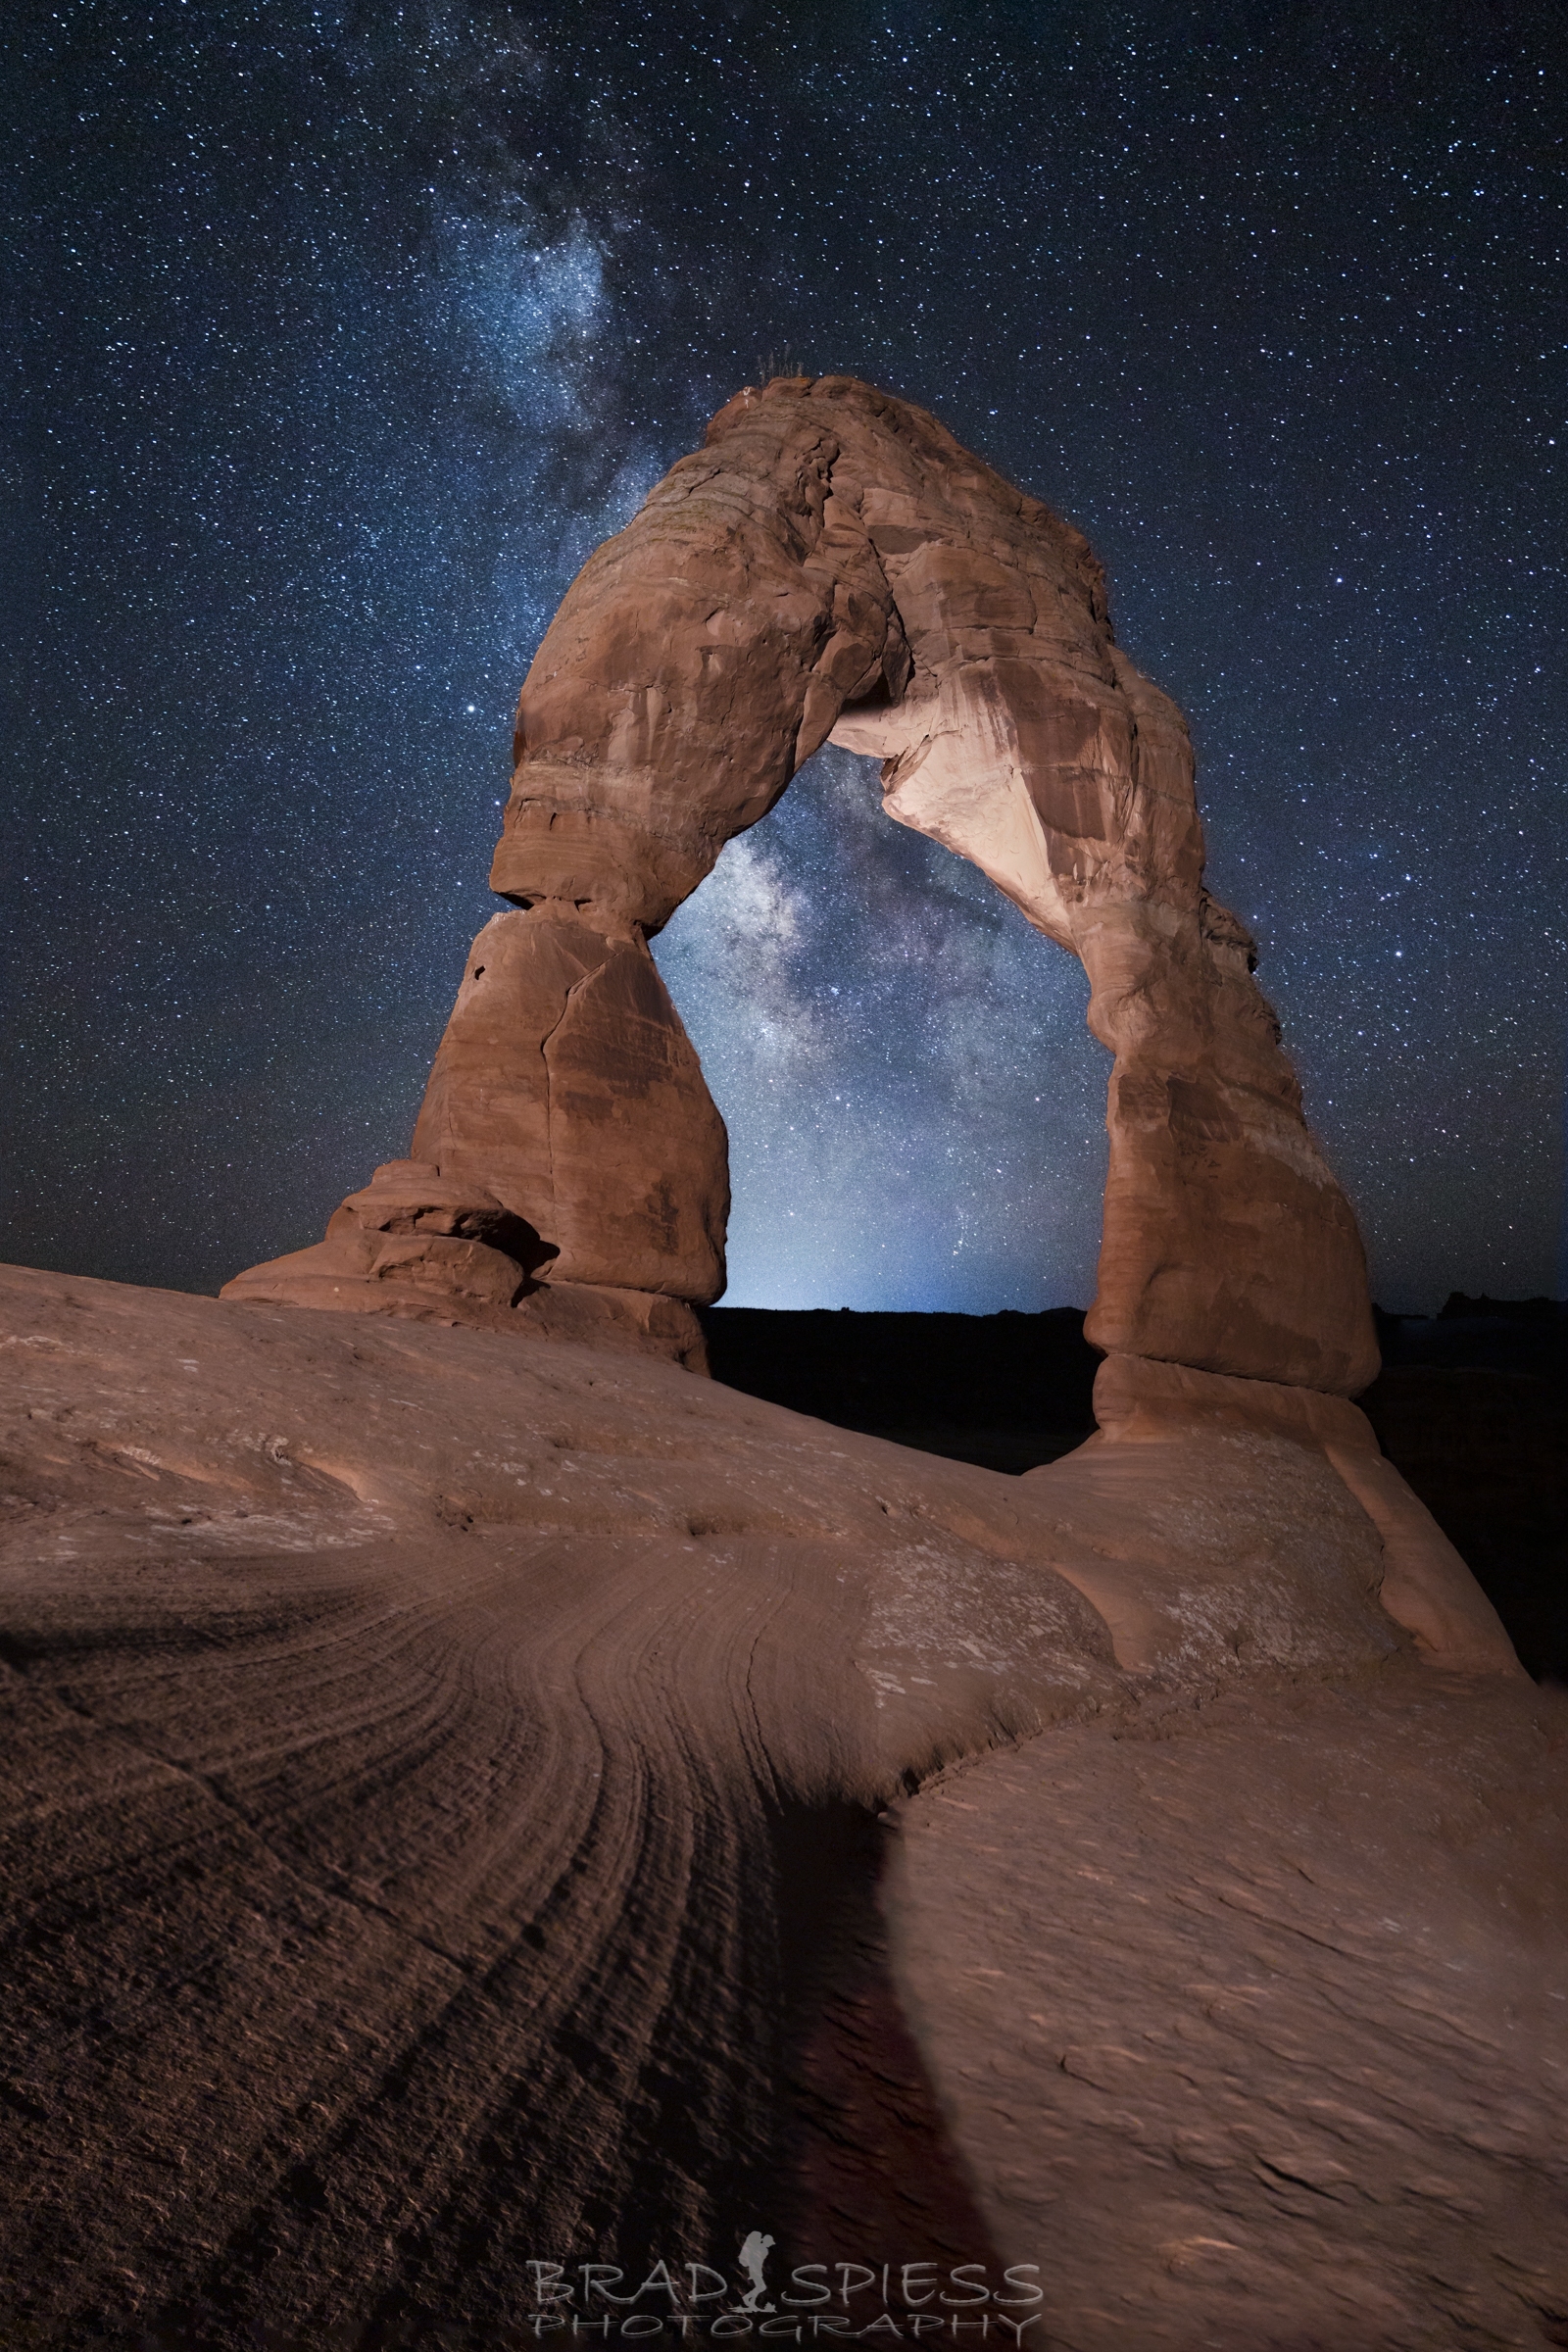 The Milky Way rising up behind the Delicate Arch